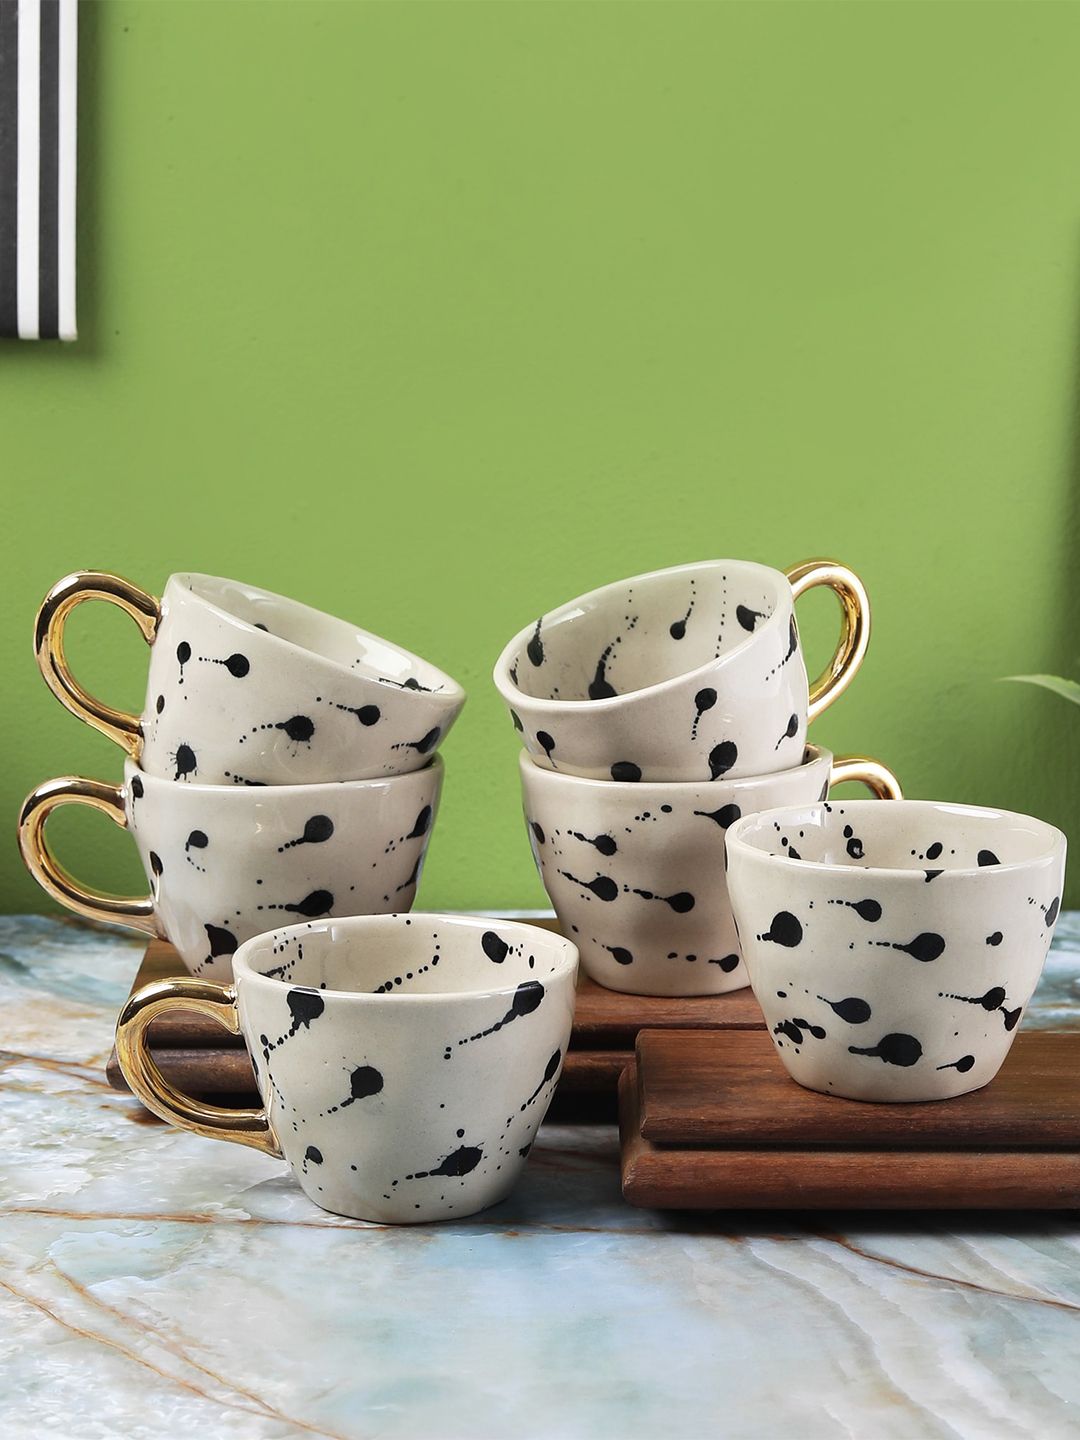 The Decor Mart Off White & Black Printed 6 Ceramic Glossy Cups Set Price in India